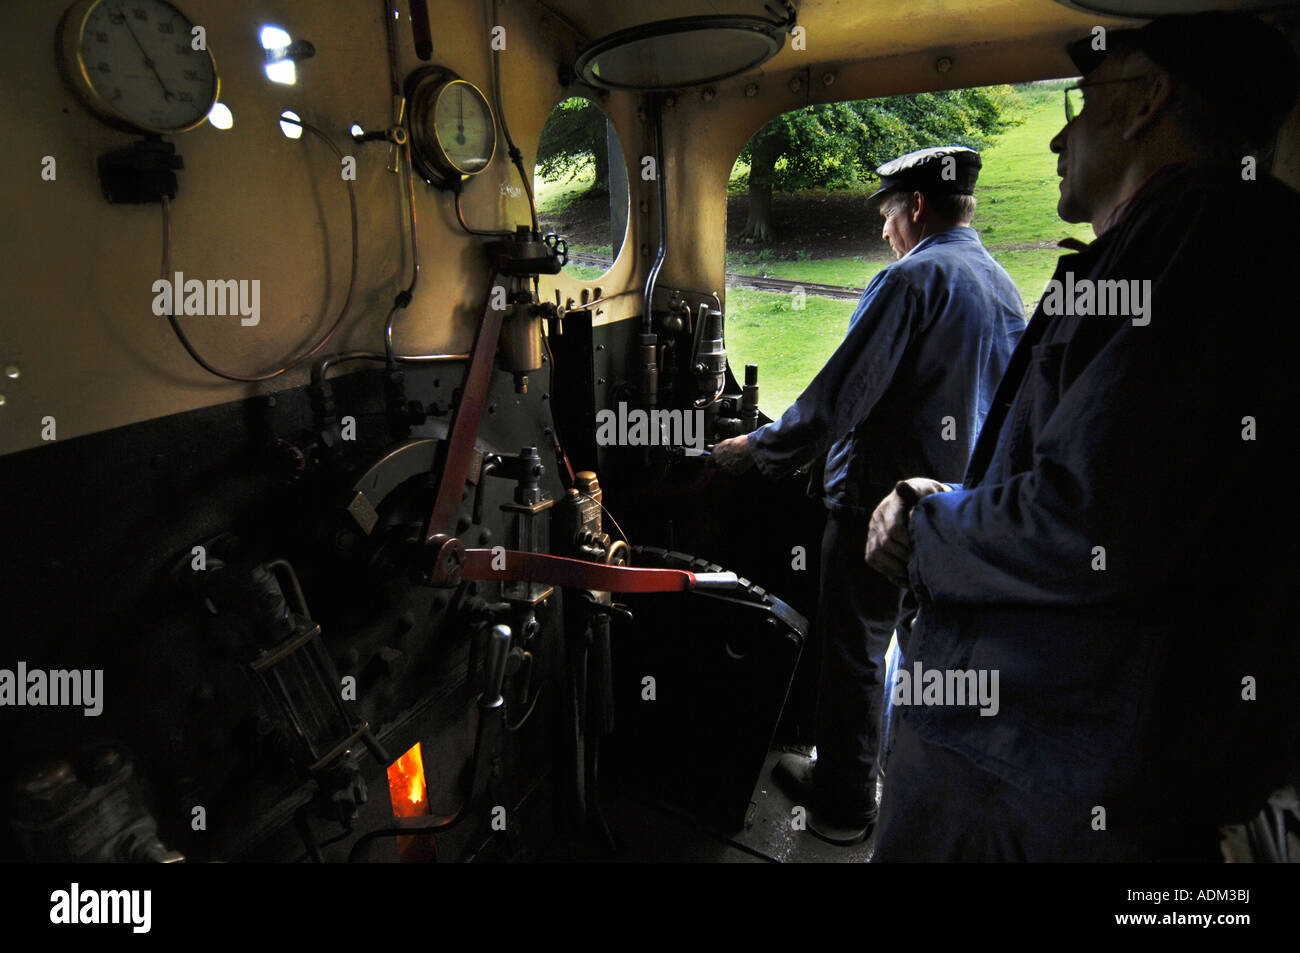 The driver and fireman on an Industrial steam locomotive 'Sir Robert McAlpine No 31' Stock Photo